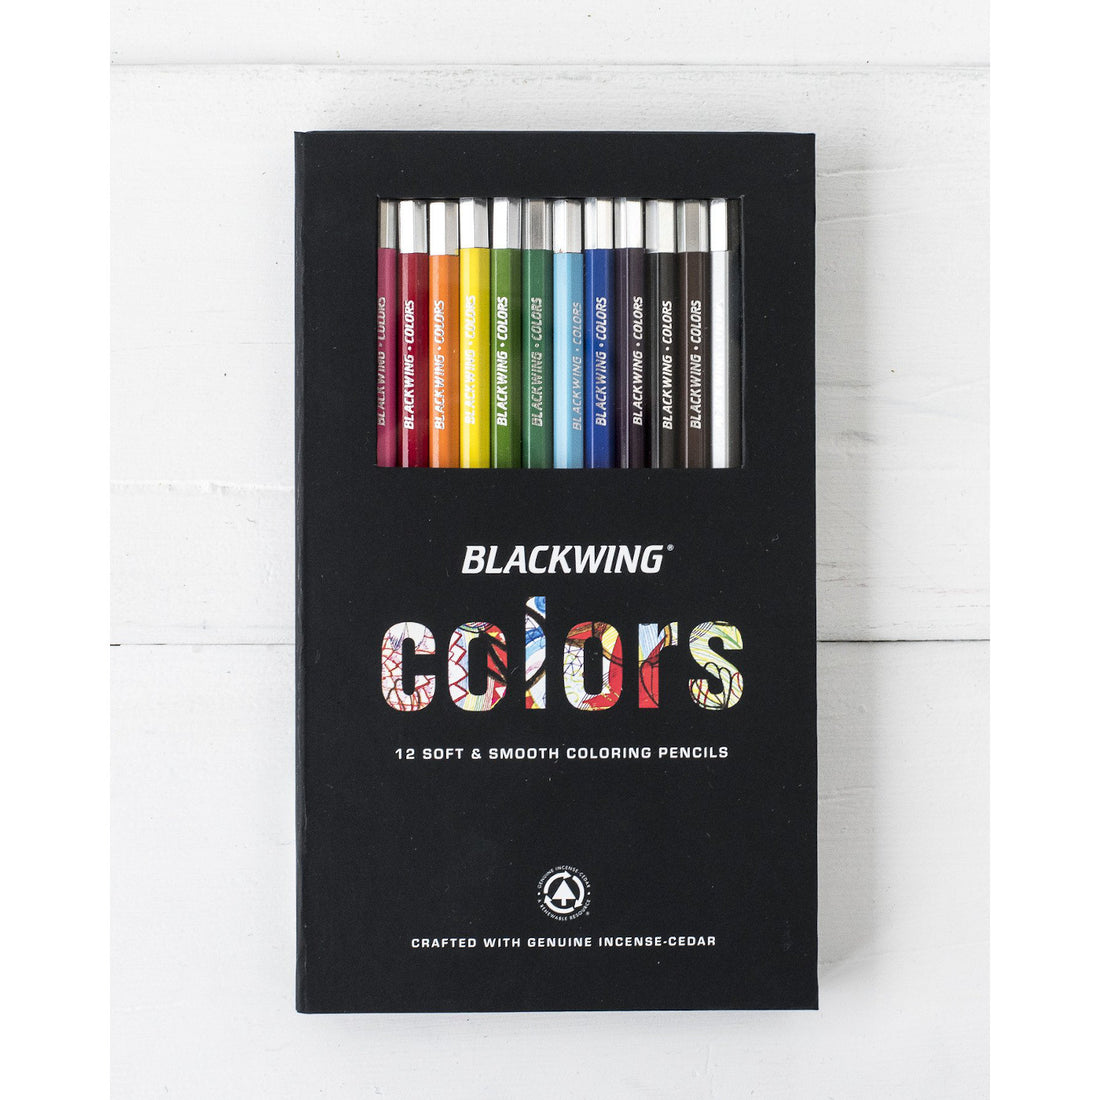 A set of 12 Blackwing Color Pencils with semi-hexagonal barrels, arrayed neatly in their packaging against a white background.